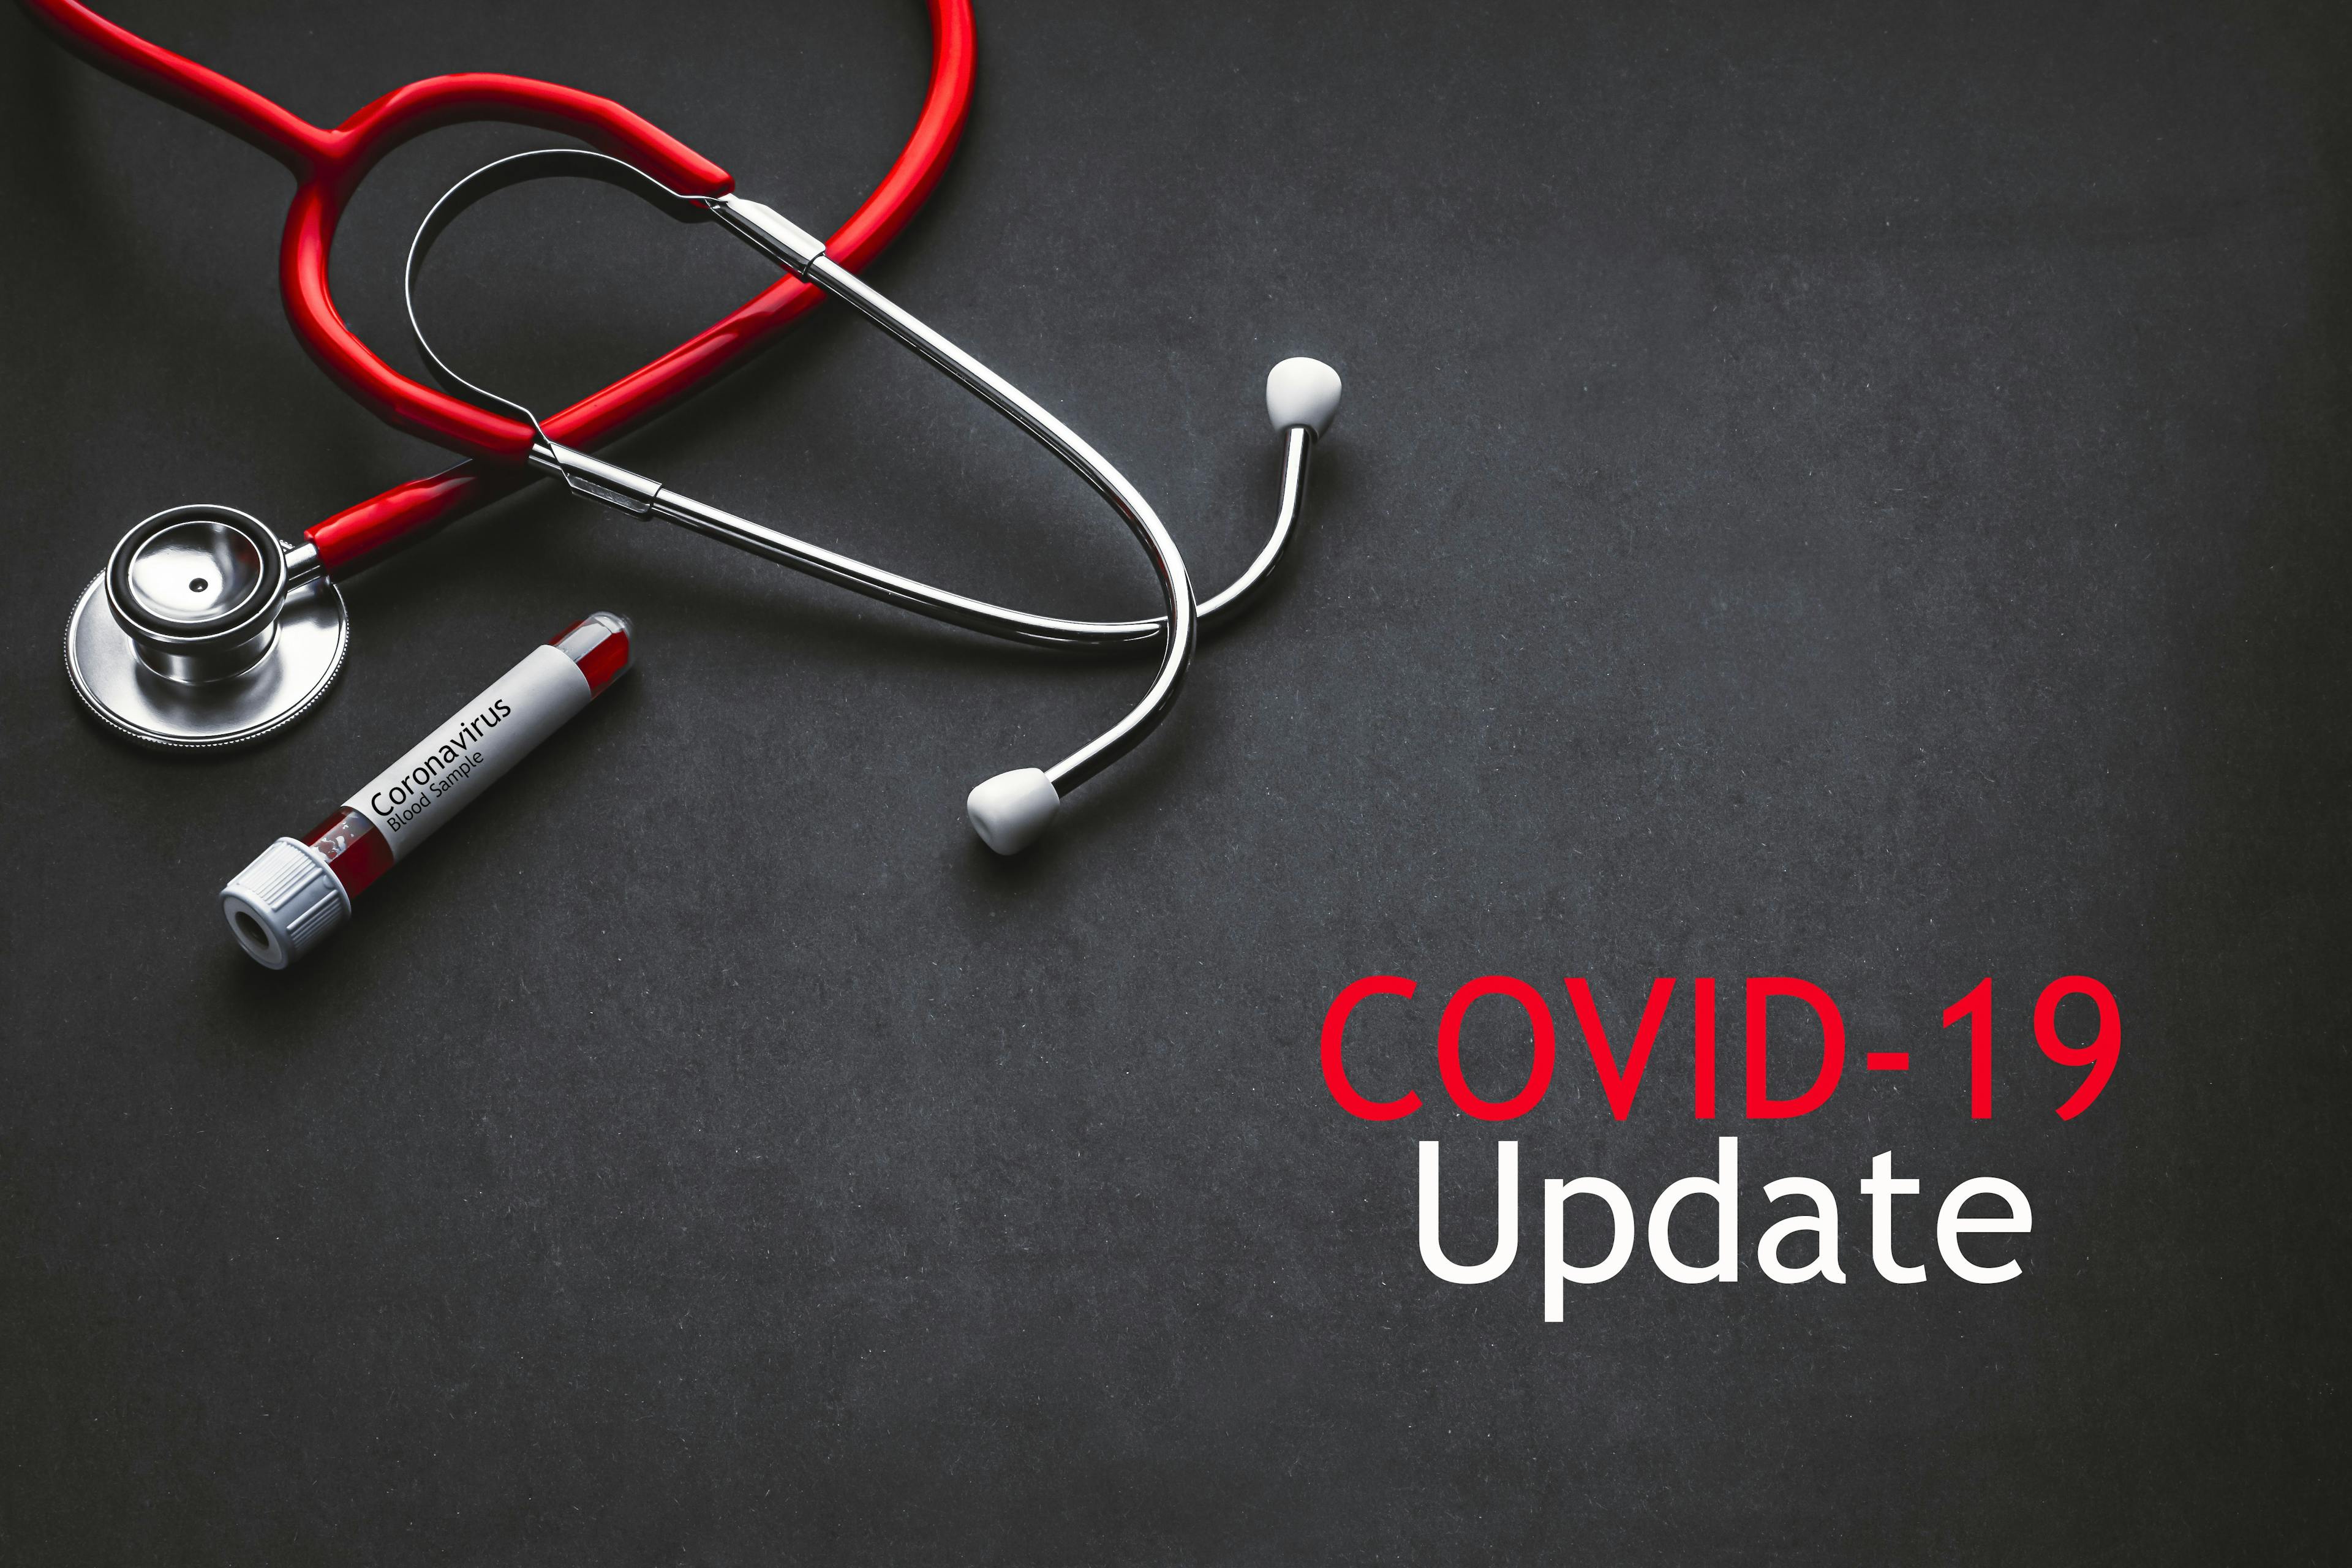 COVID-19 Update: US and Global Cases, Deaths, and Recoveries as of February 5, 2021